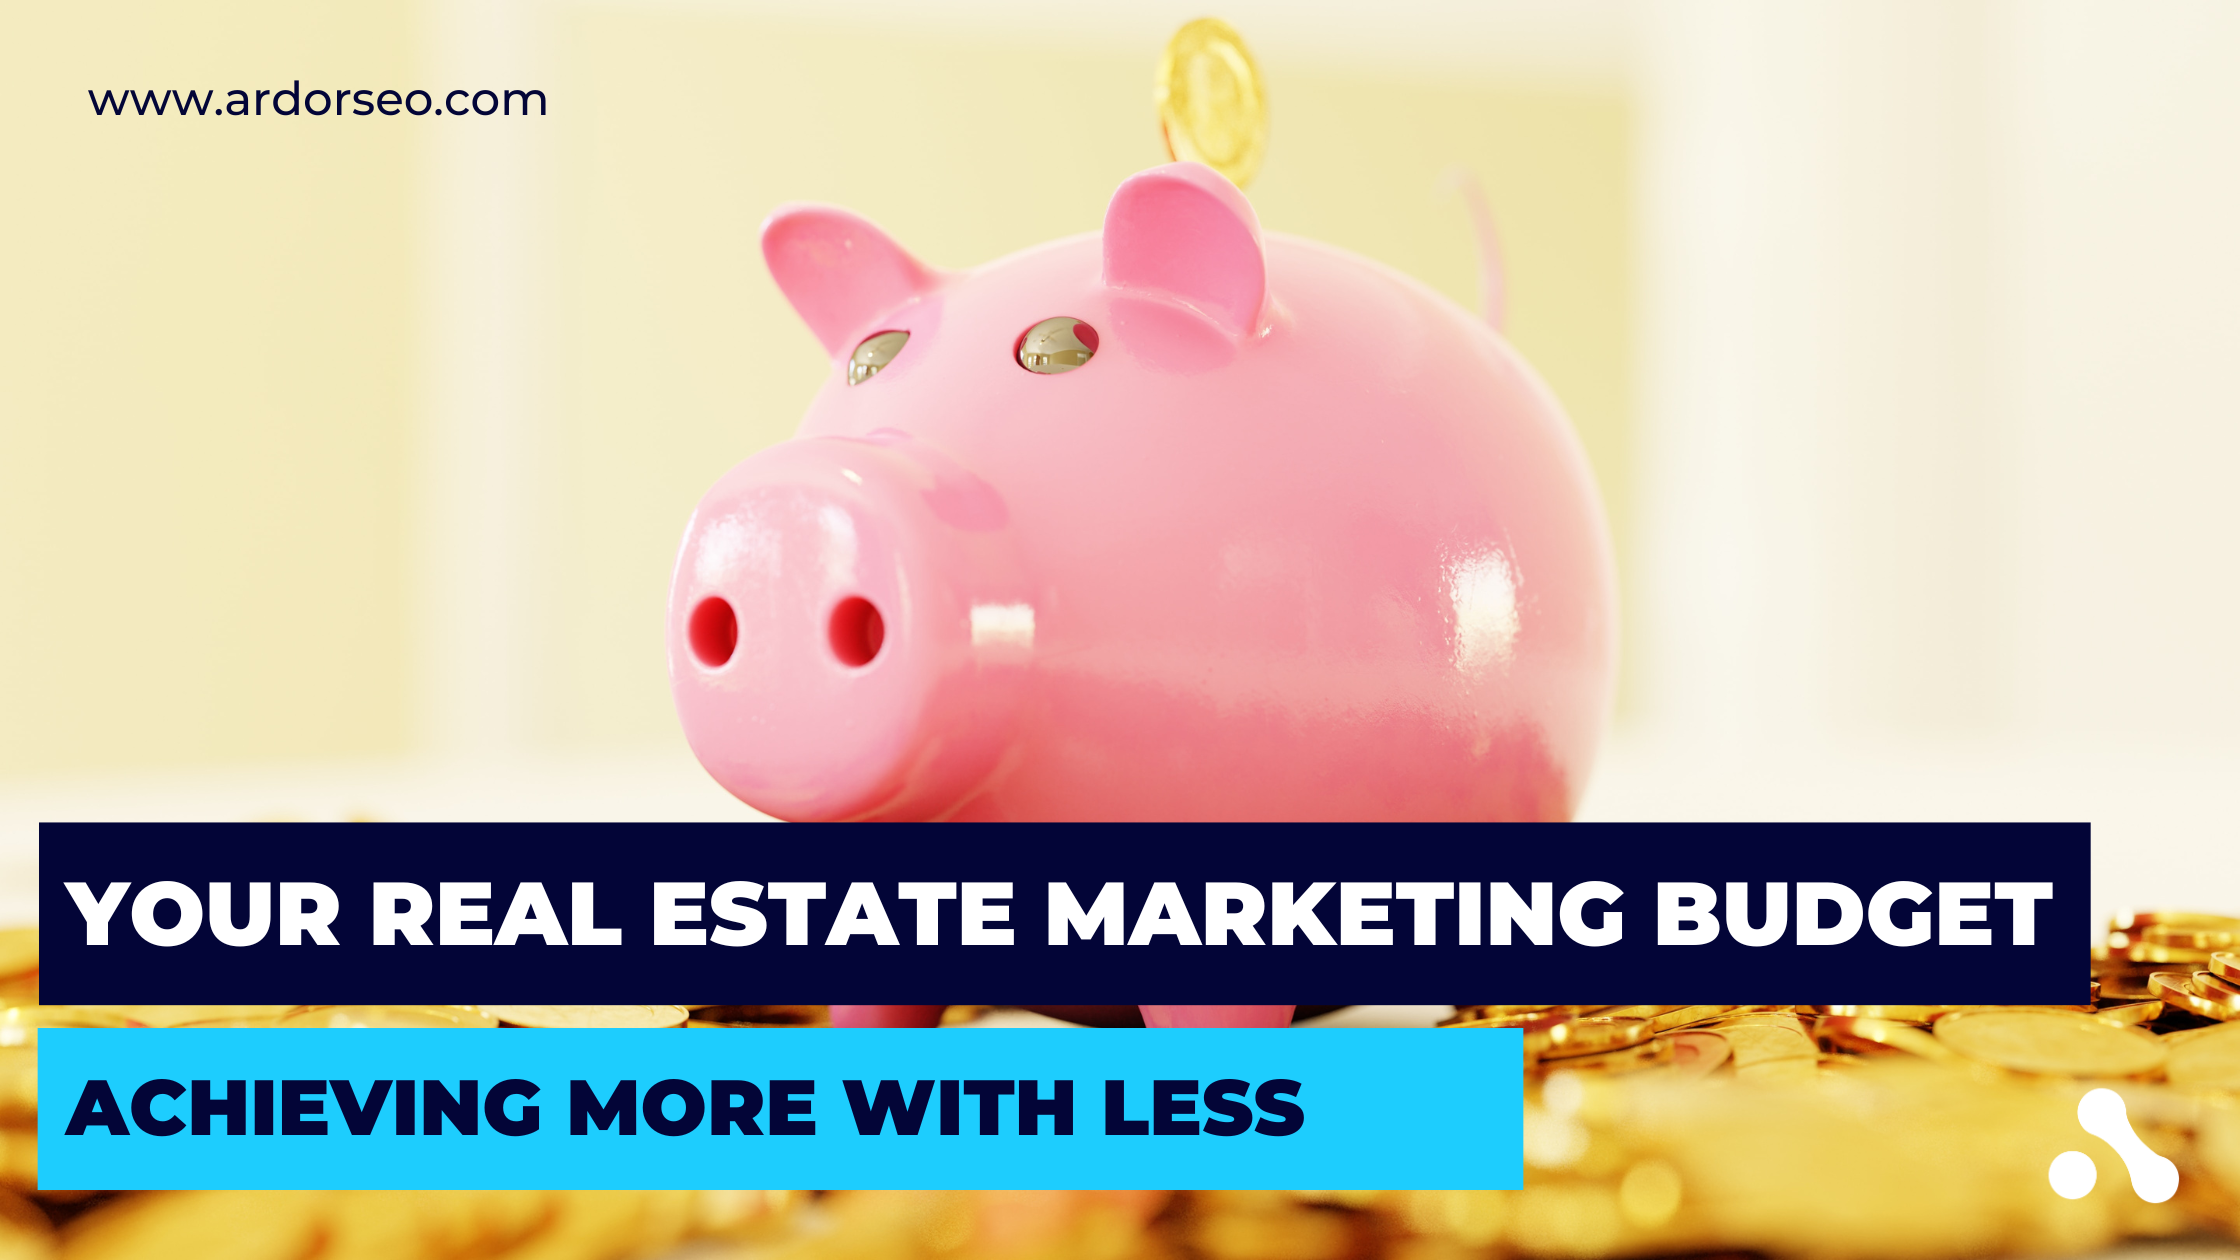 Use these real estate marketing ideas to make the most out of your budget.Use these real estate marketing ideas to make the most out of your budget.